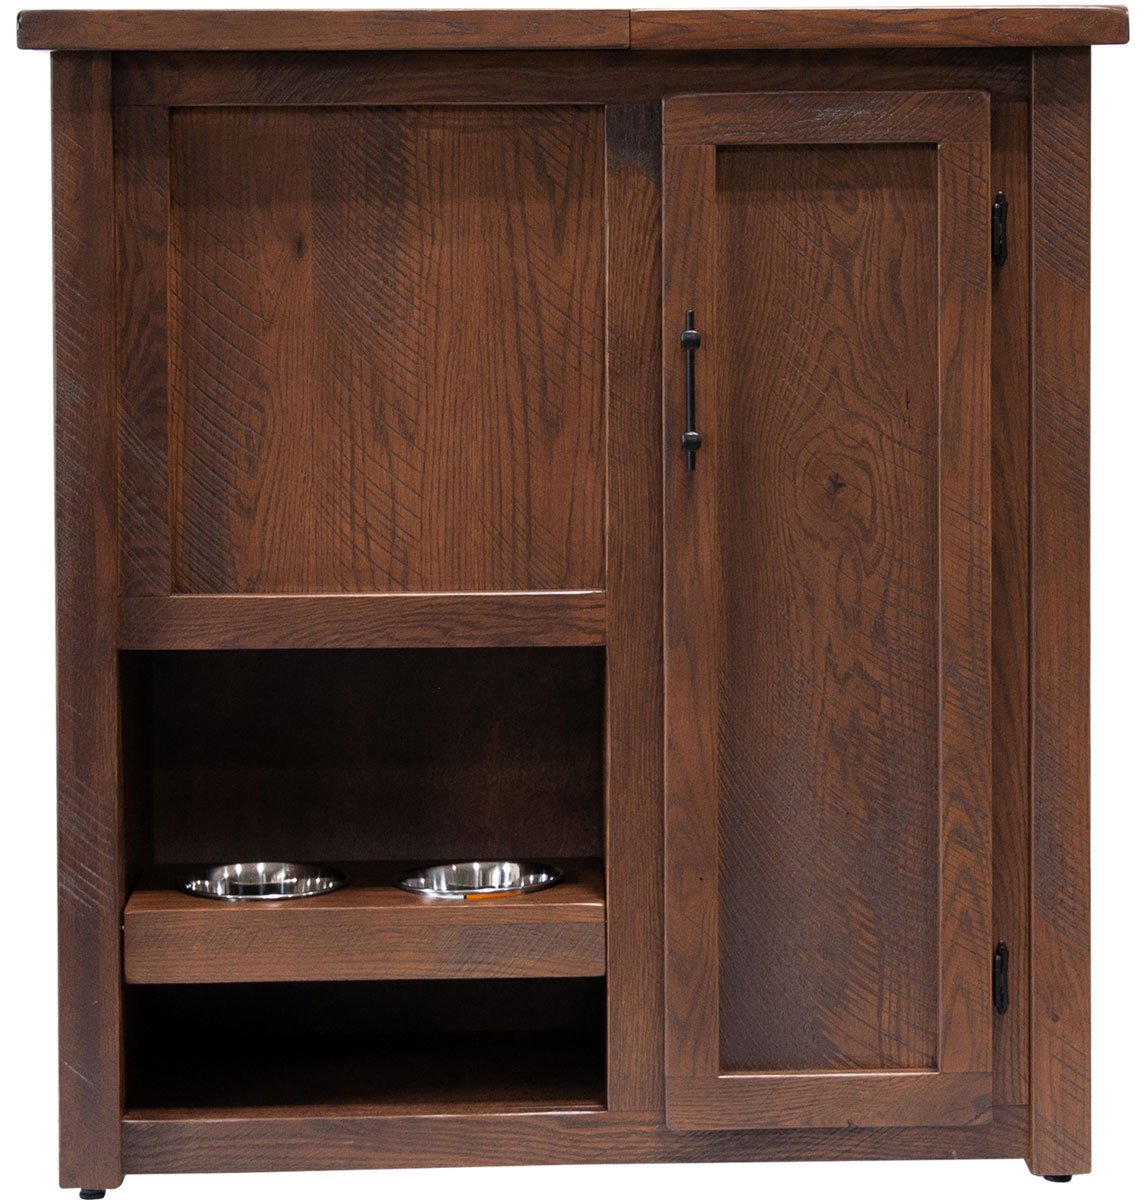 Rustic Pet Armoire with Feeder